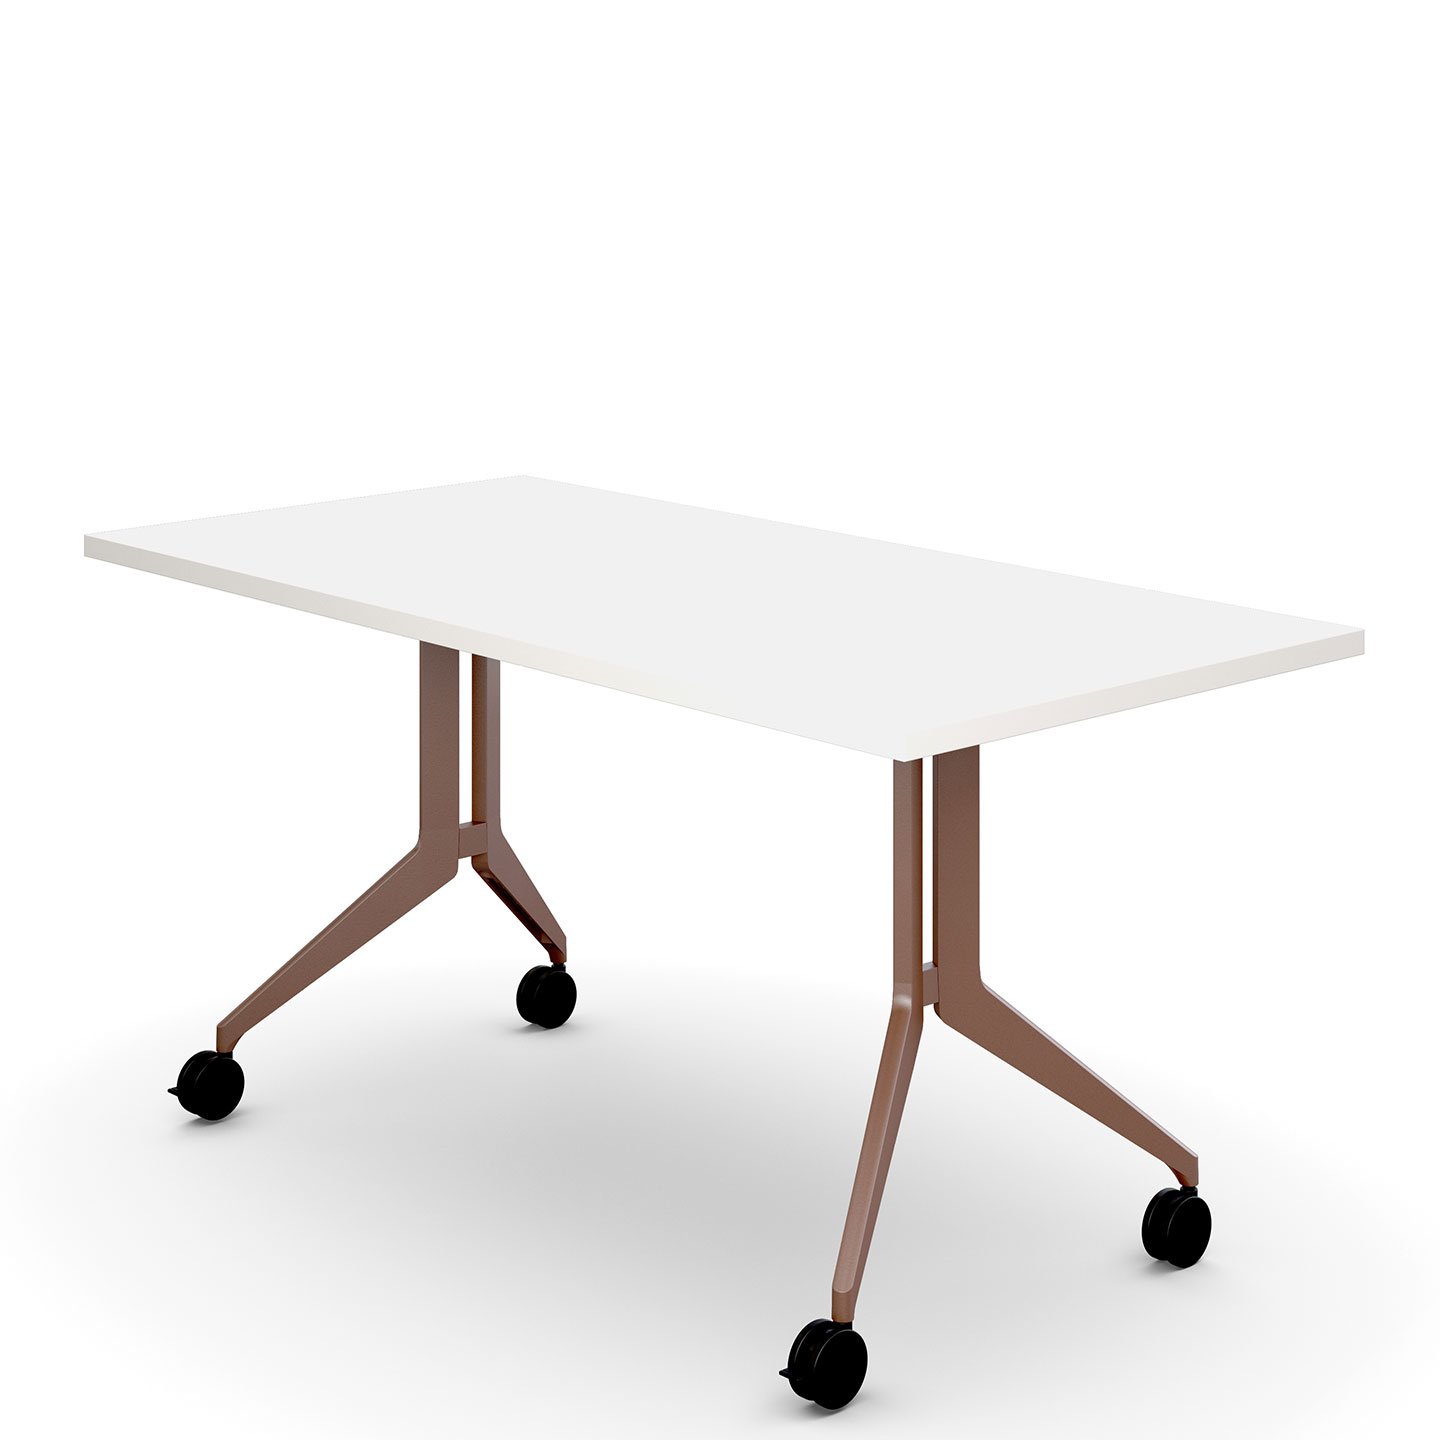 Haworth Planes Collaborative Table with white rectangle top and 4 legs with wheels